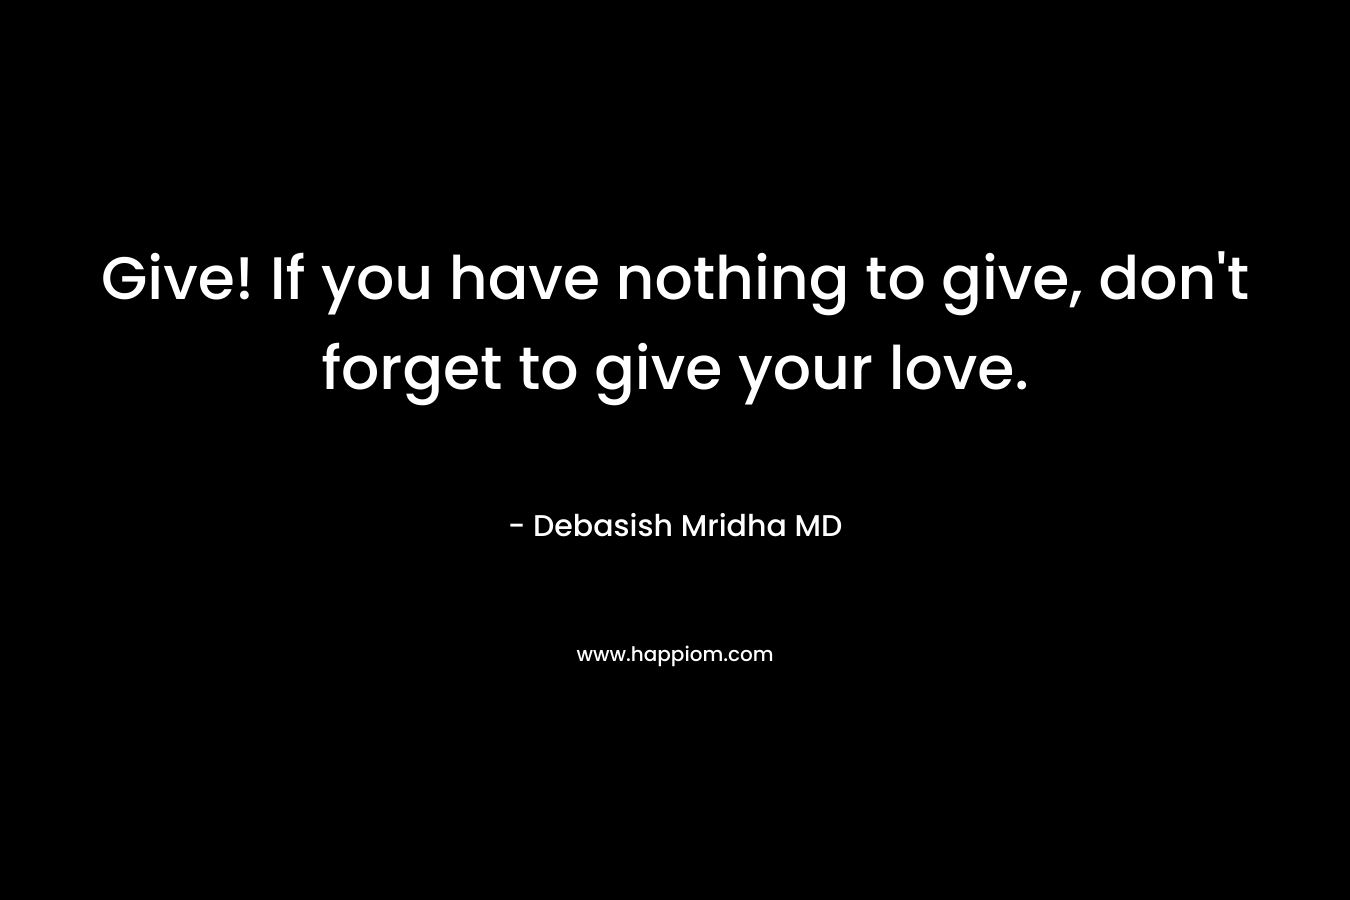 Give! If you have nothing to give, don't forget to give your love.